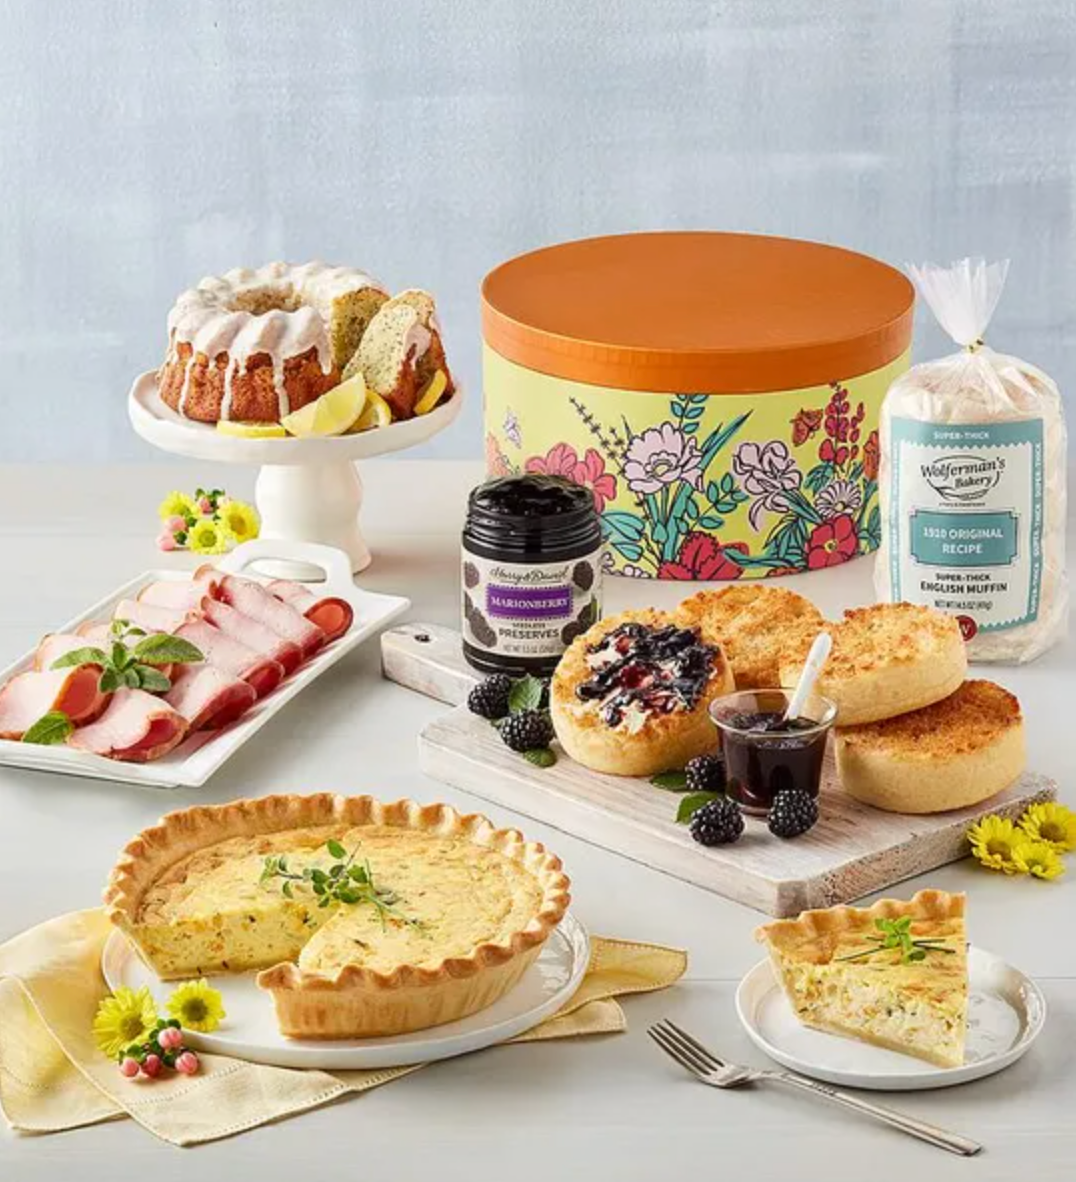 All the assorted food included in the gift set